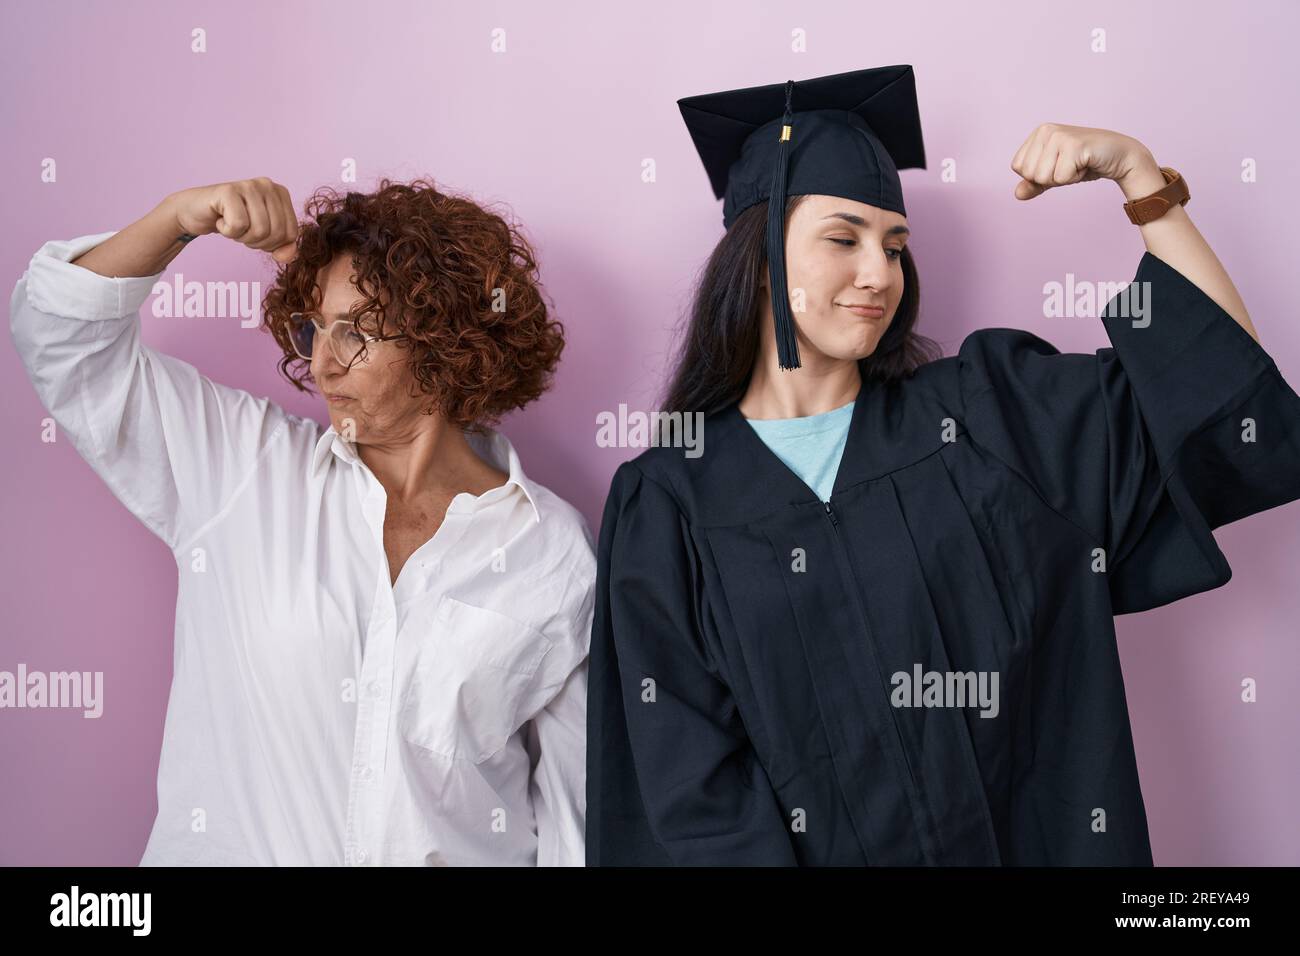 Hispanic mother and daughter wearing graduation cap and ceremony robe showing arms muscles smiling proud. fitness concept. Stock Photo